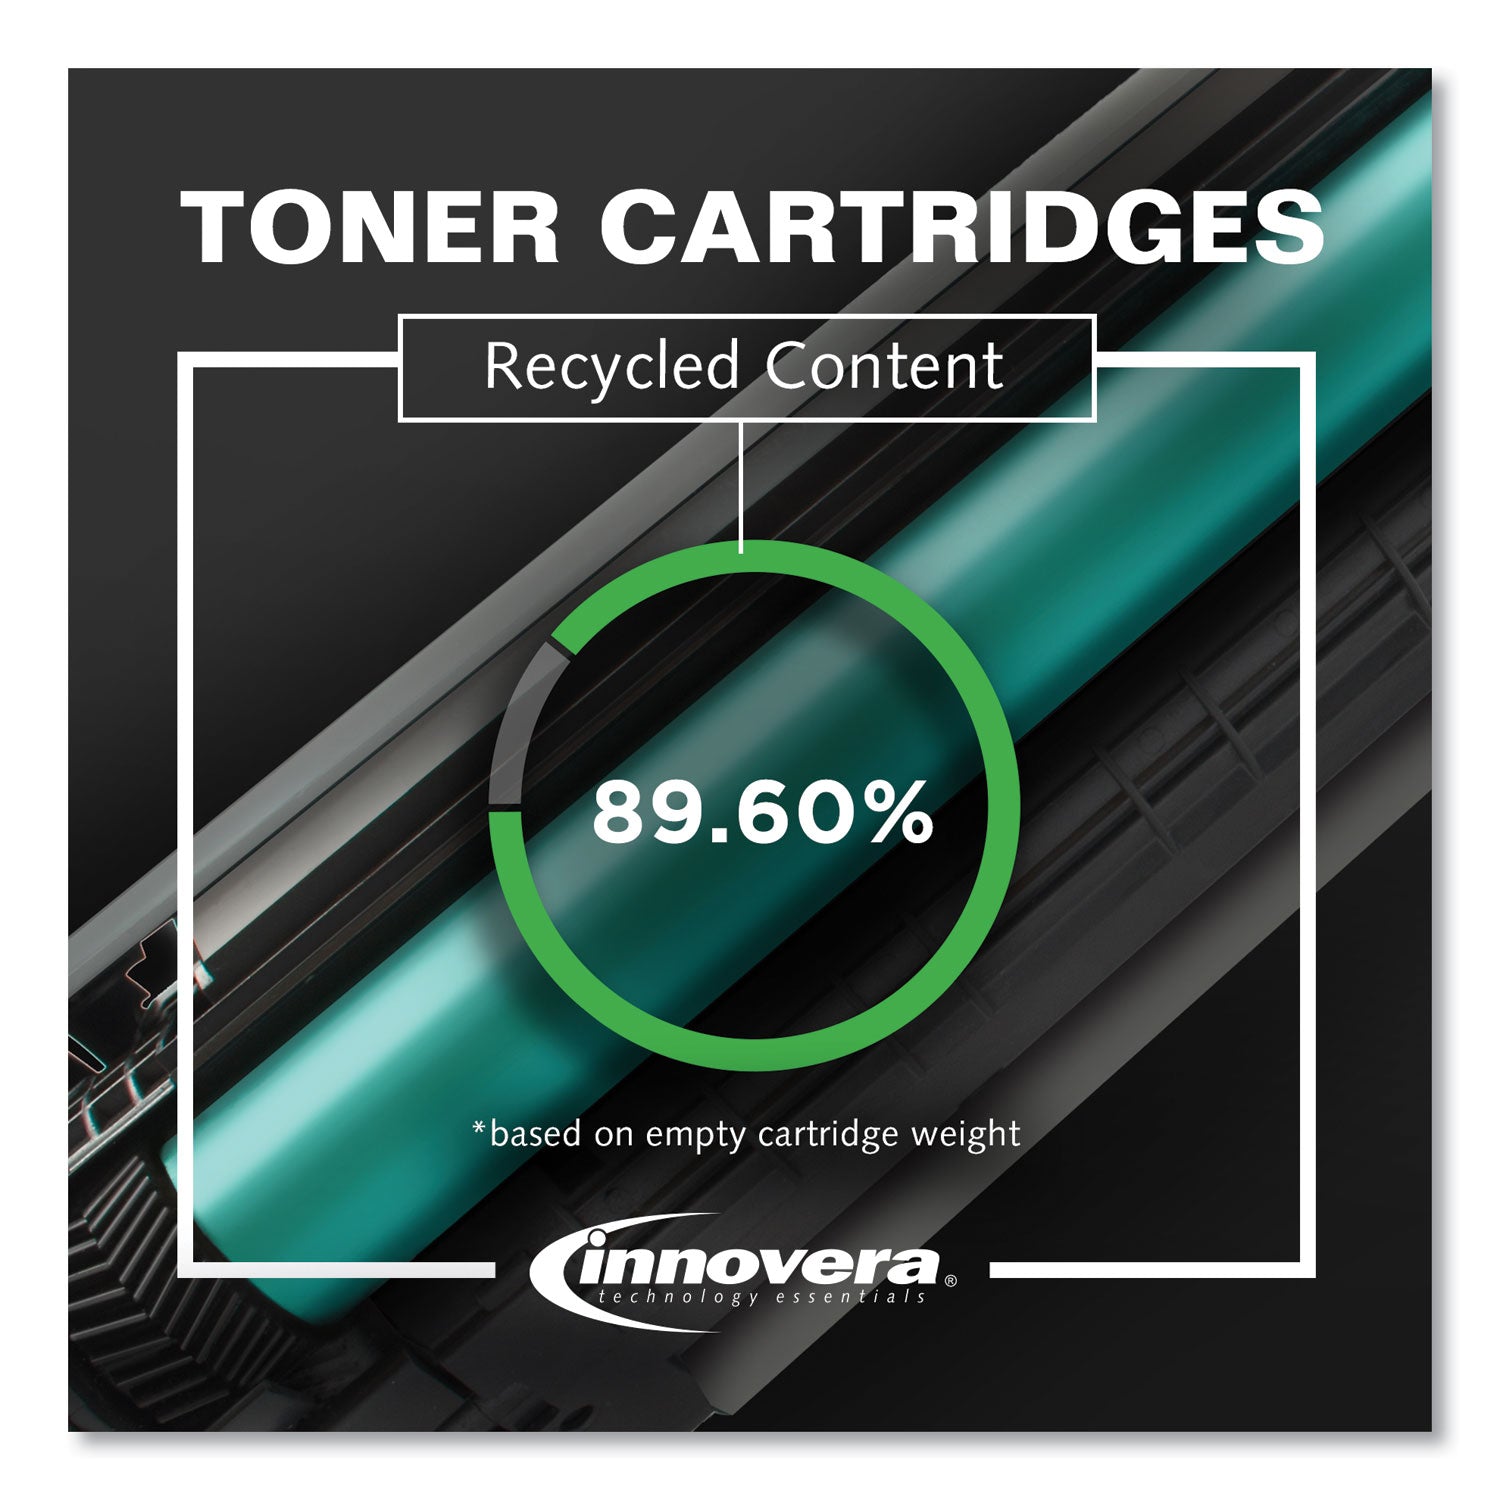 Remanufactured Black Extended-Yield Toner, Replacement for 85A (CE285AJ), 2,300 Page-Yield - 